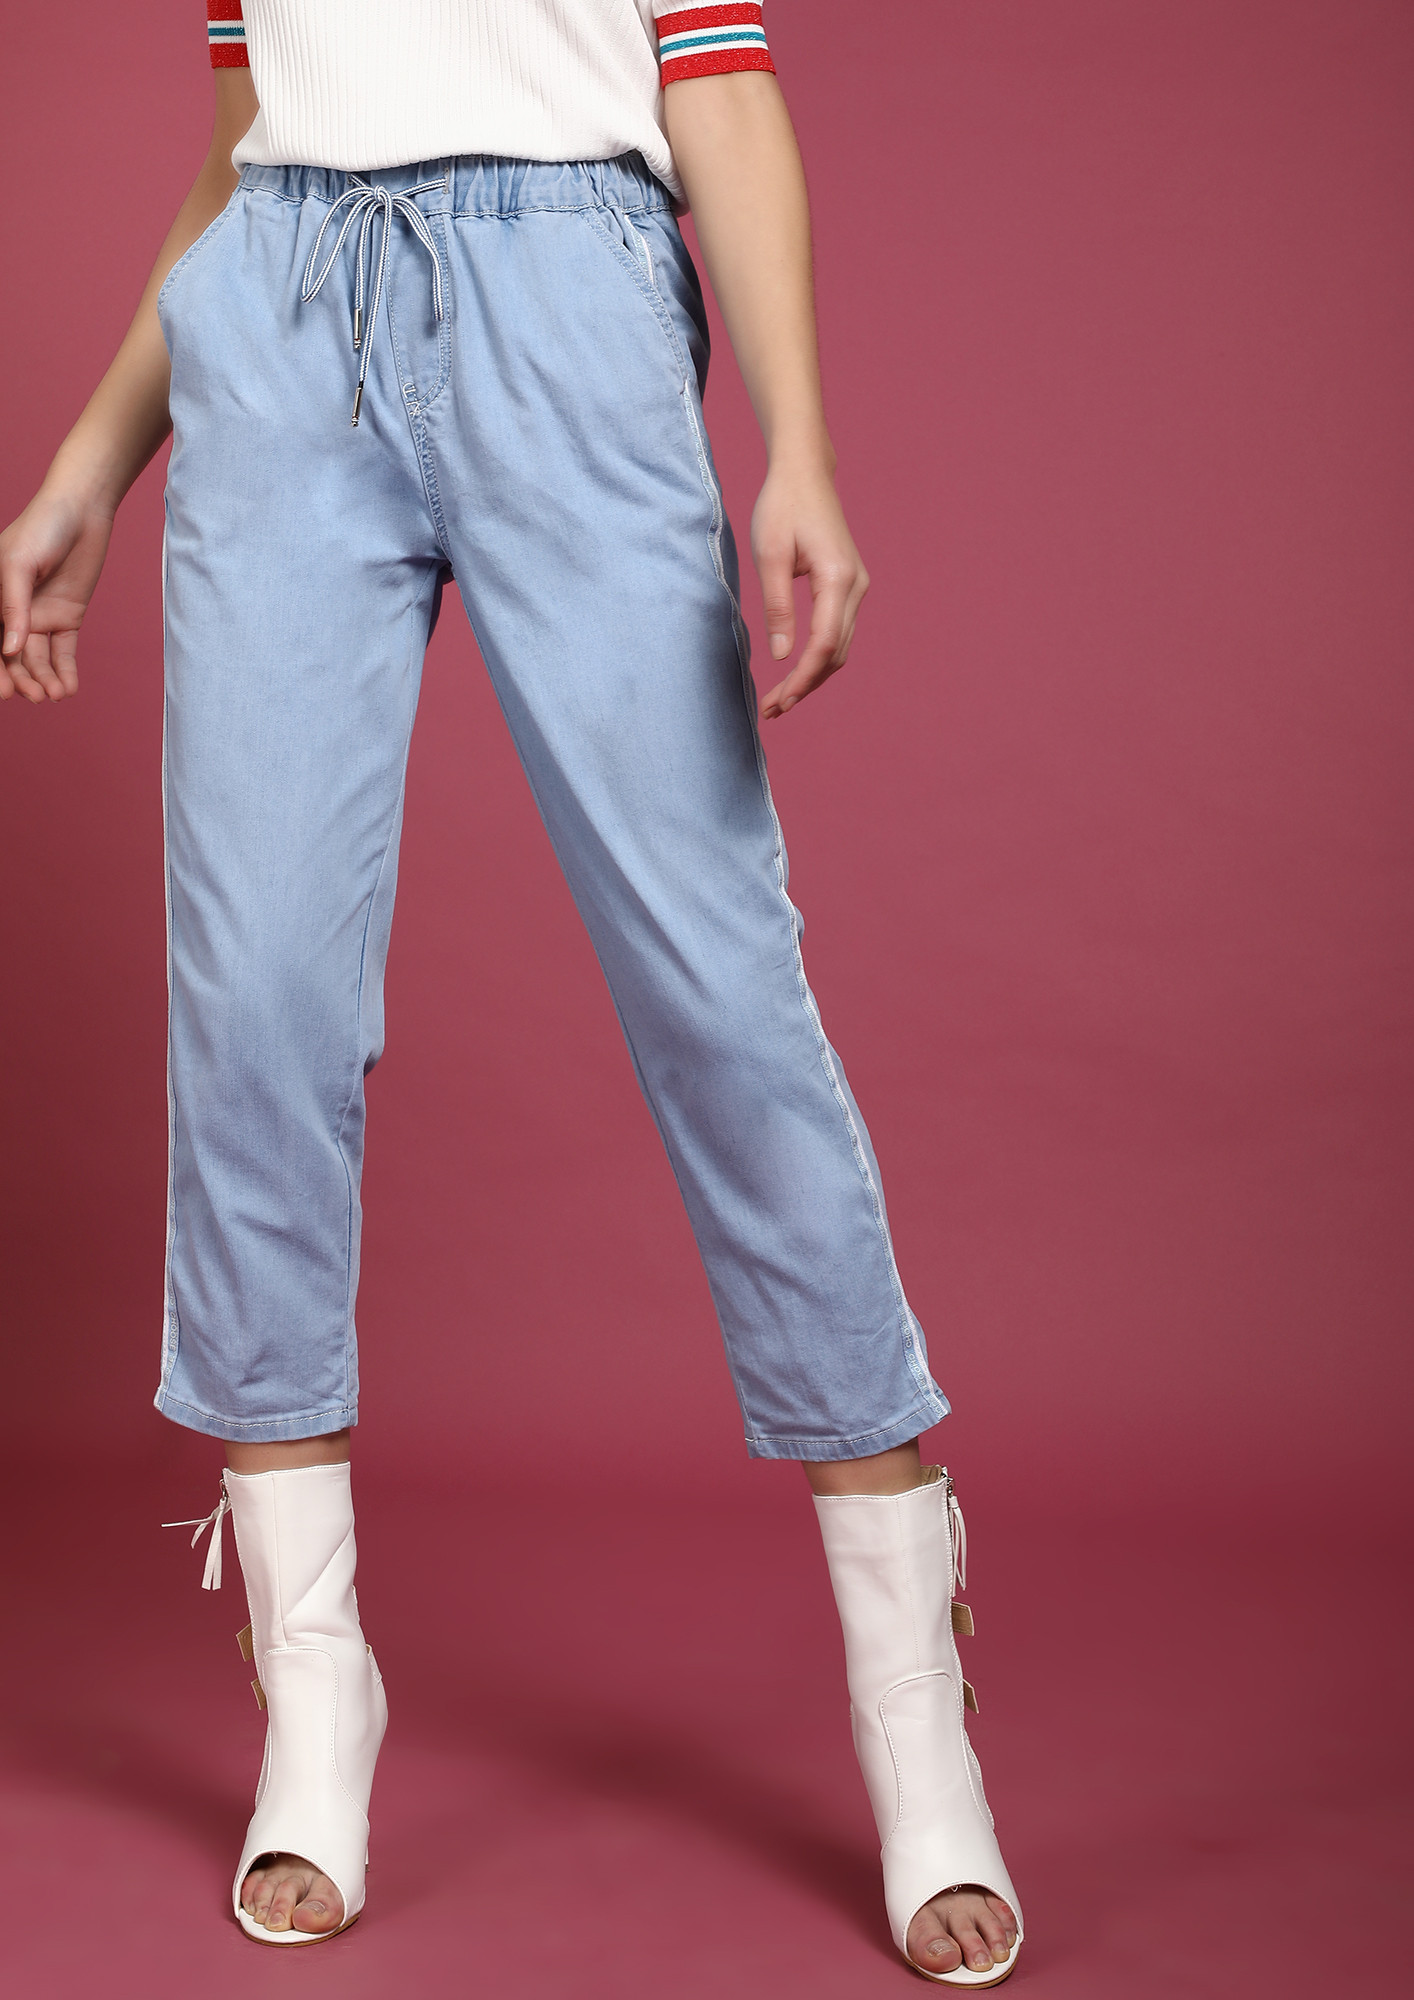 TOUCH AND GO LIGHT BLUE JOGGER JEANS